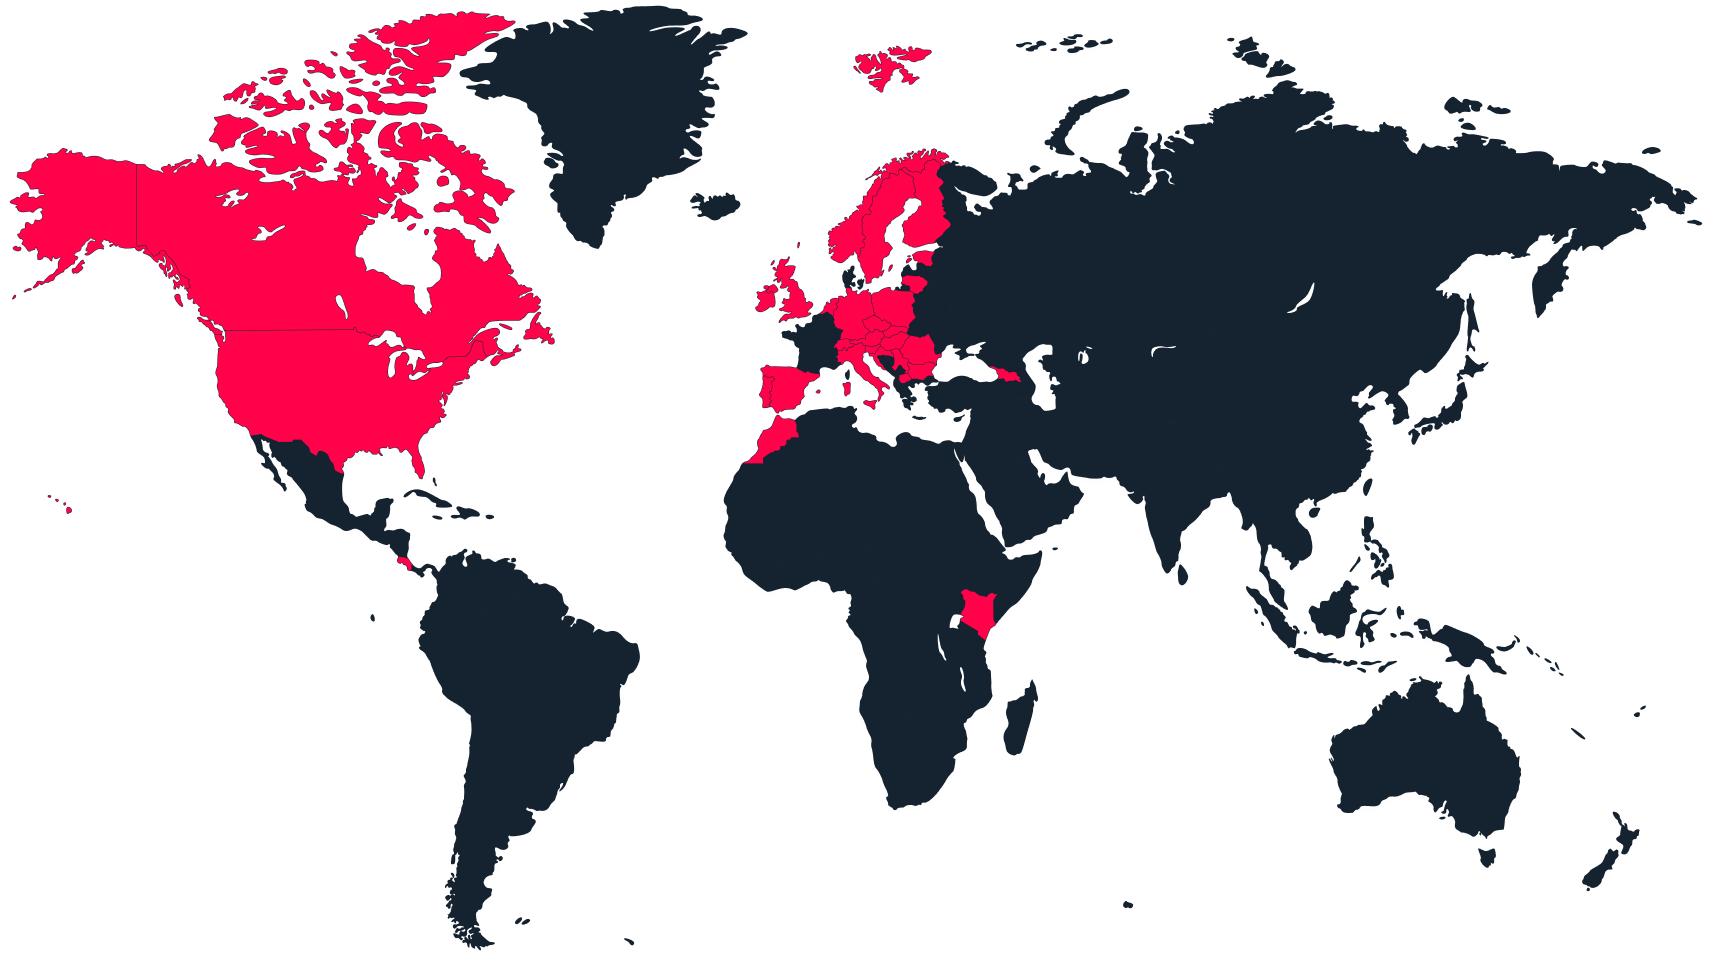 A world map with the active countries marked with red